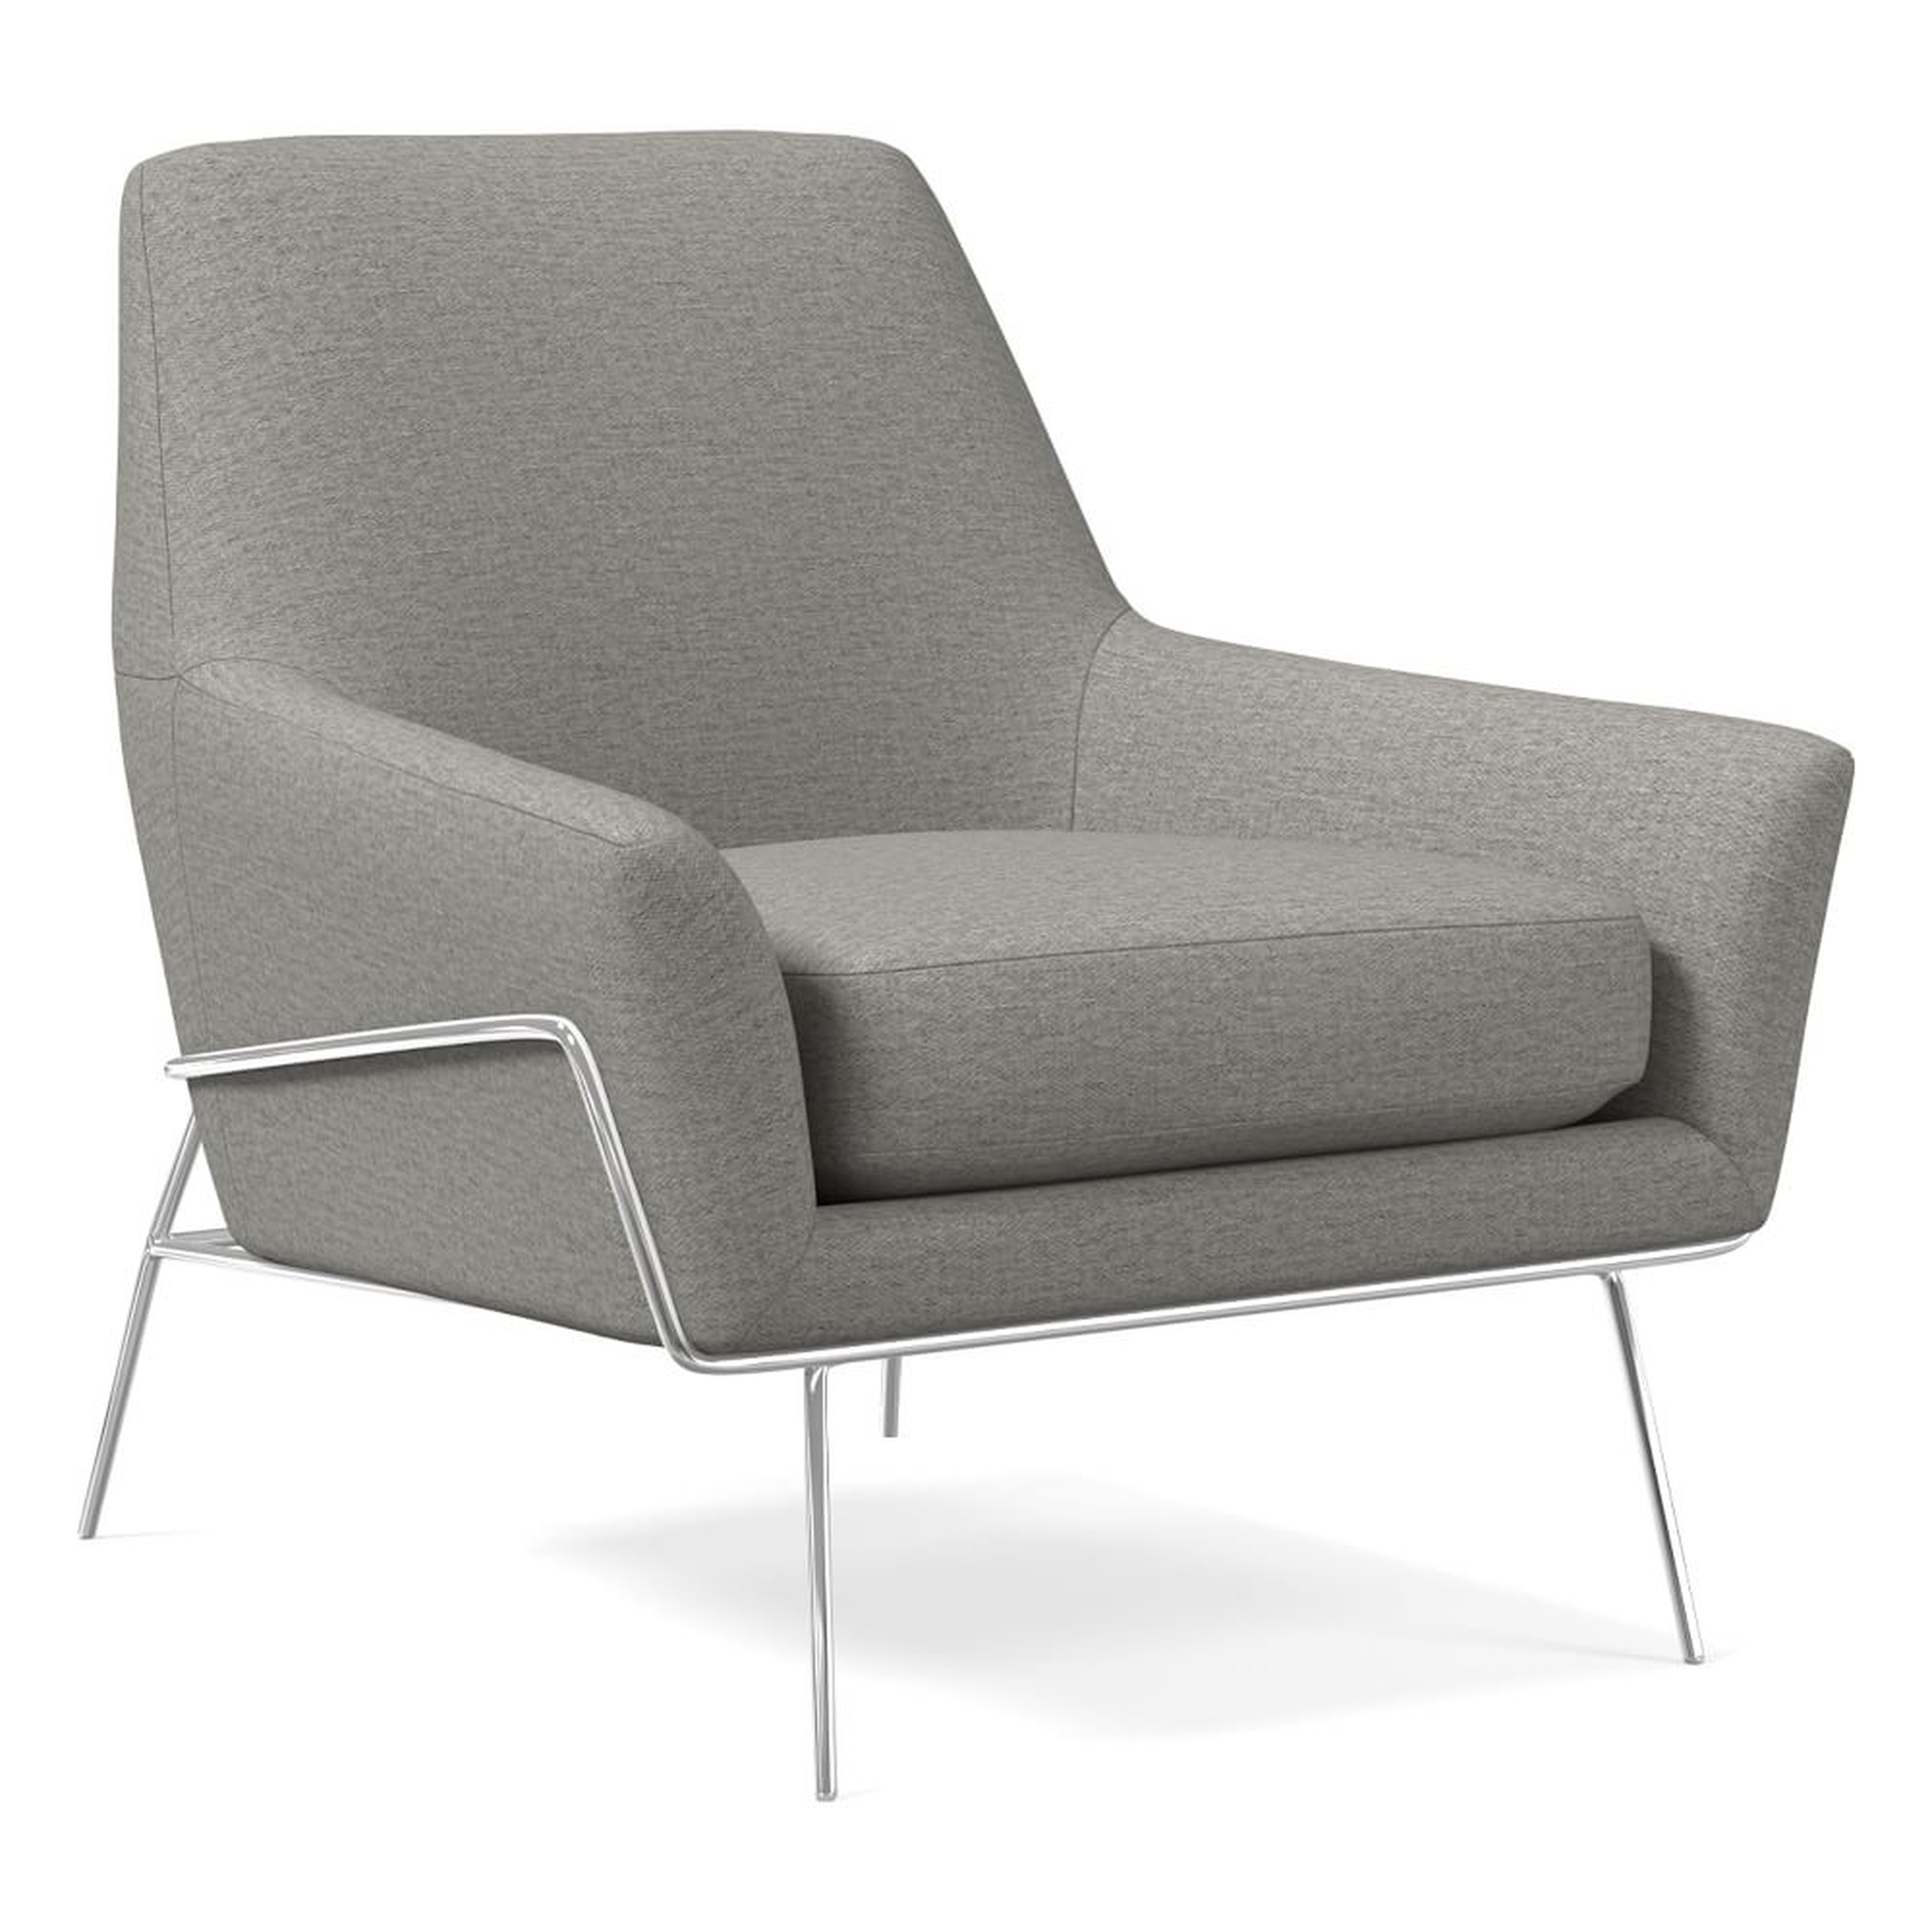 Lucas Wire Base Chair, Poly, Twill, Silver, Polished Nickel - West Elm